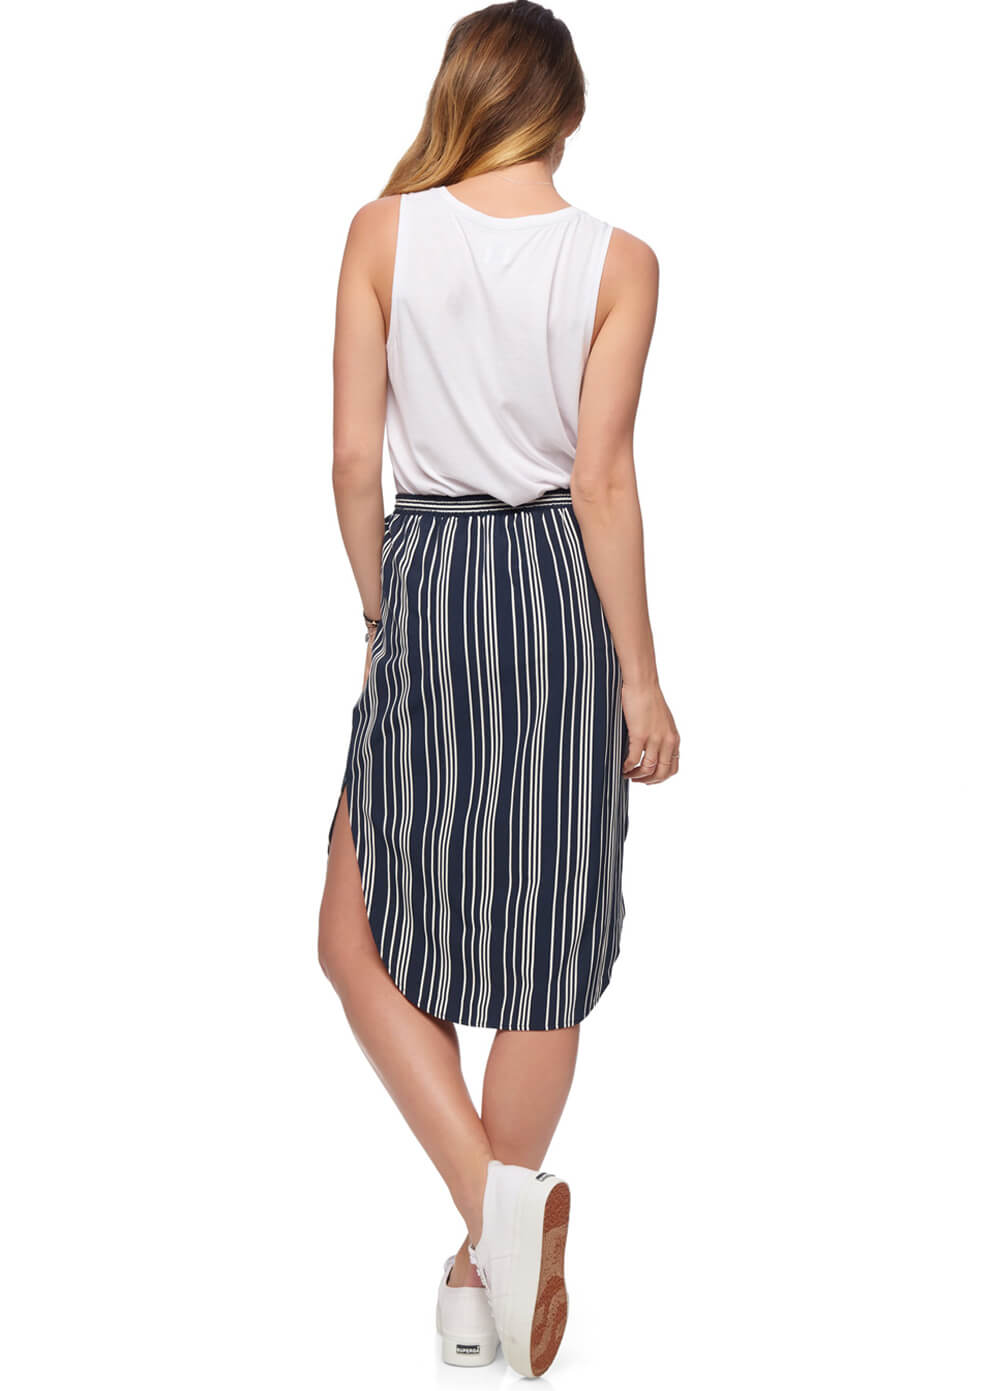 Mind Over Matter Maternity Skirt in Navy Stripes by Bae The Label